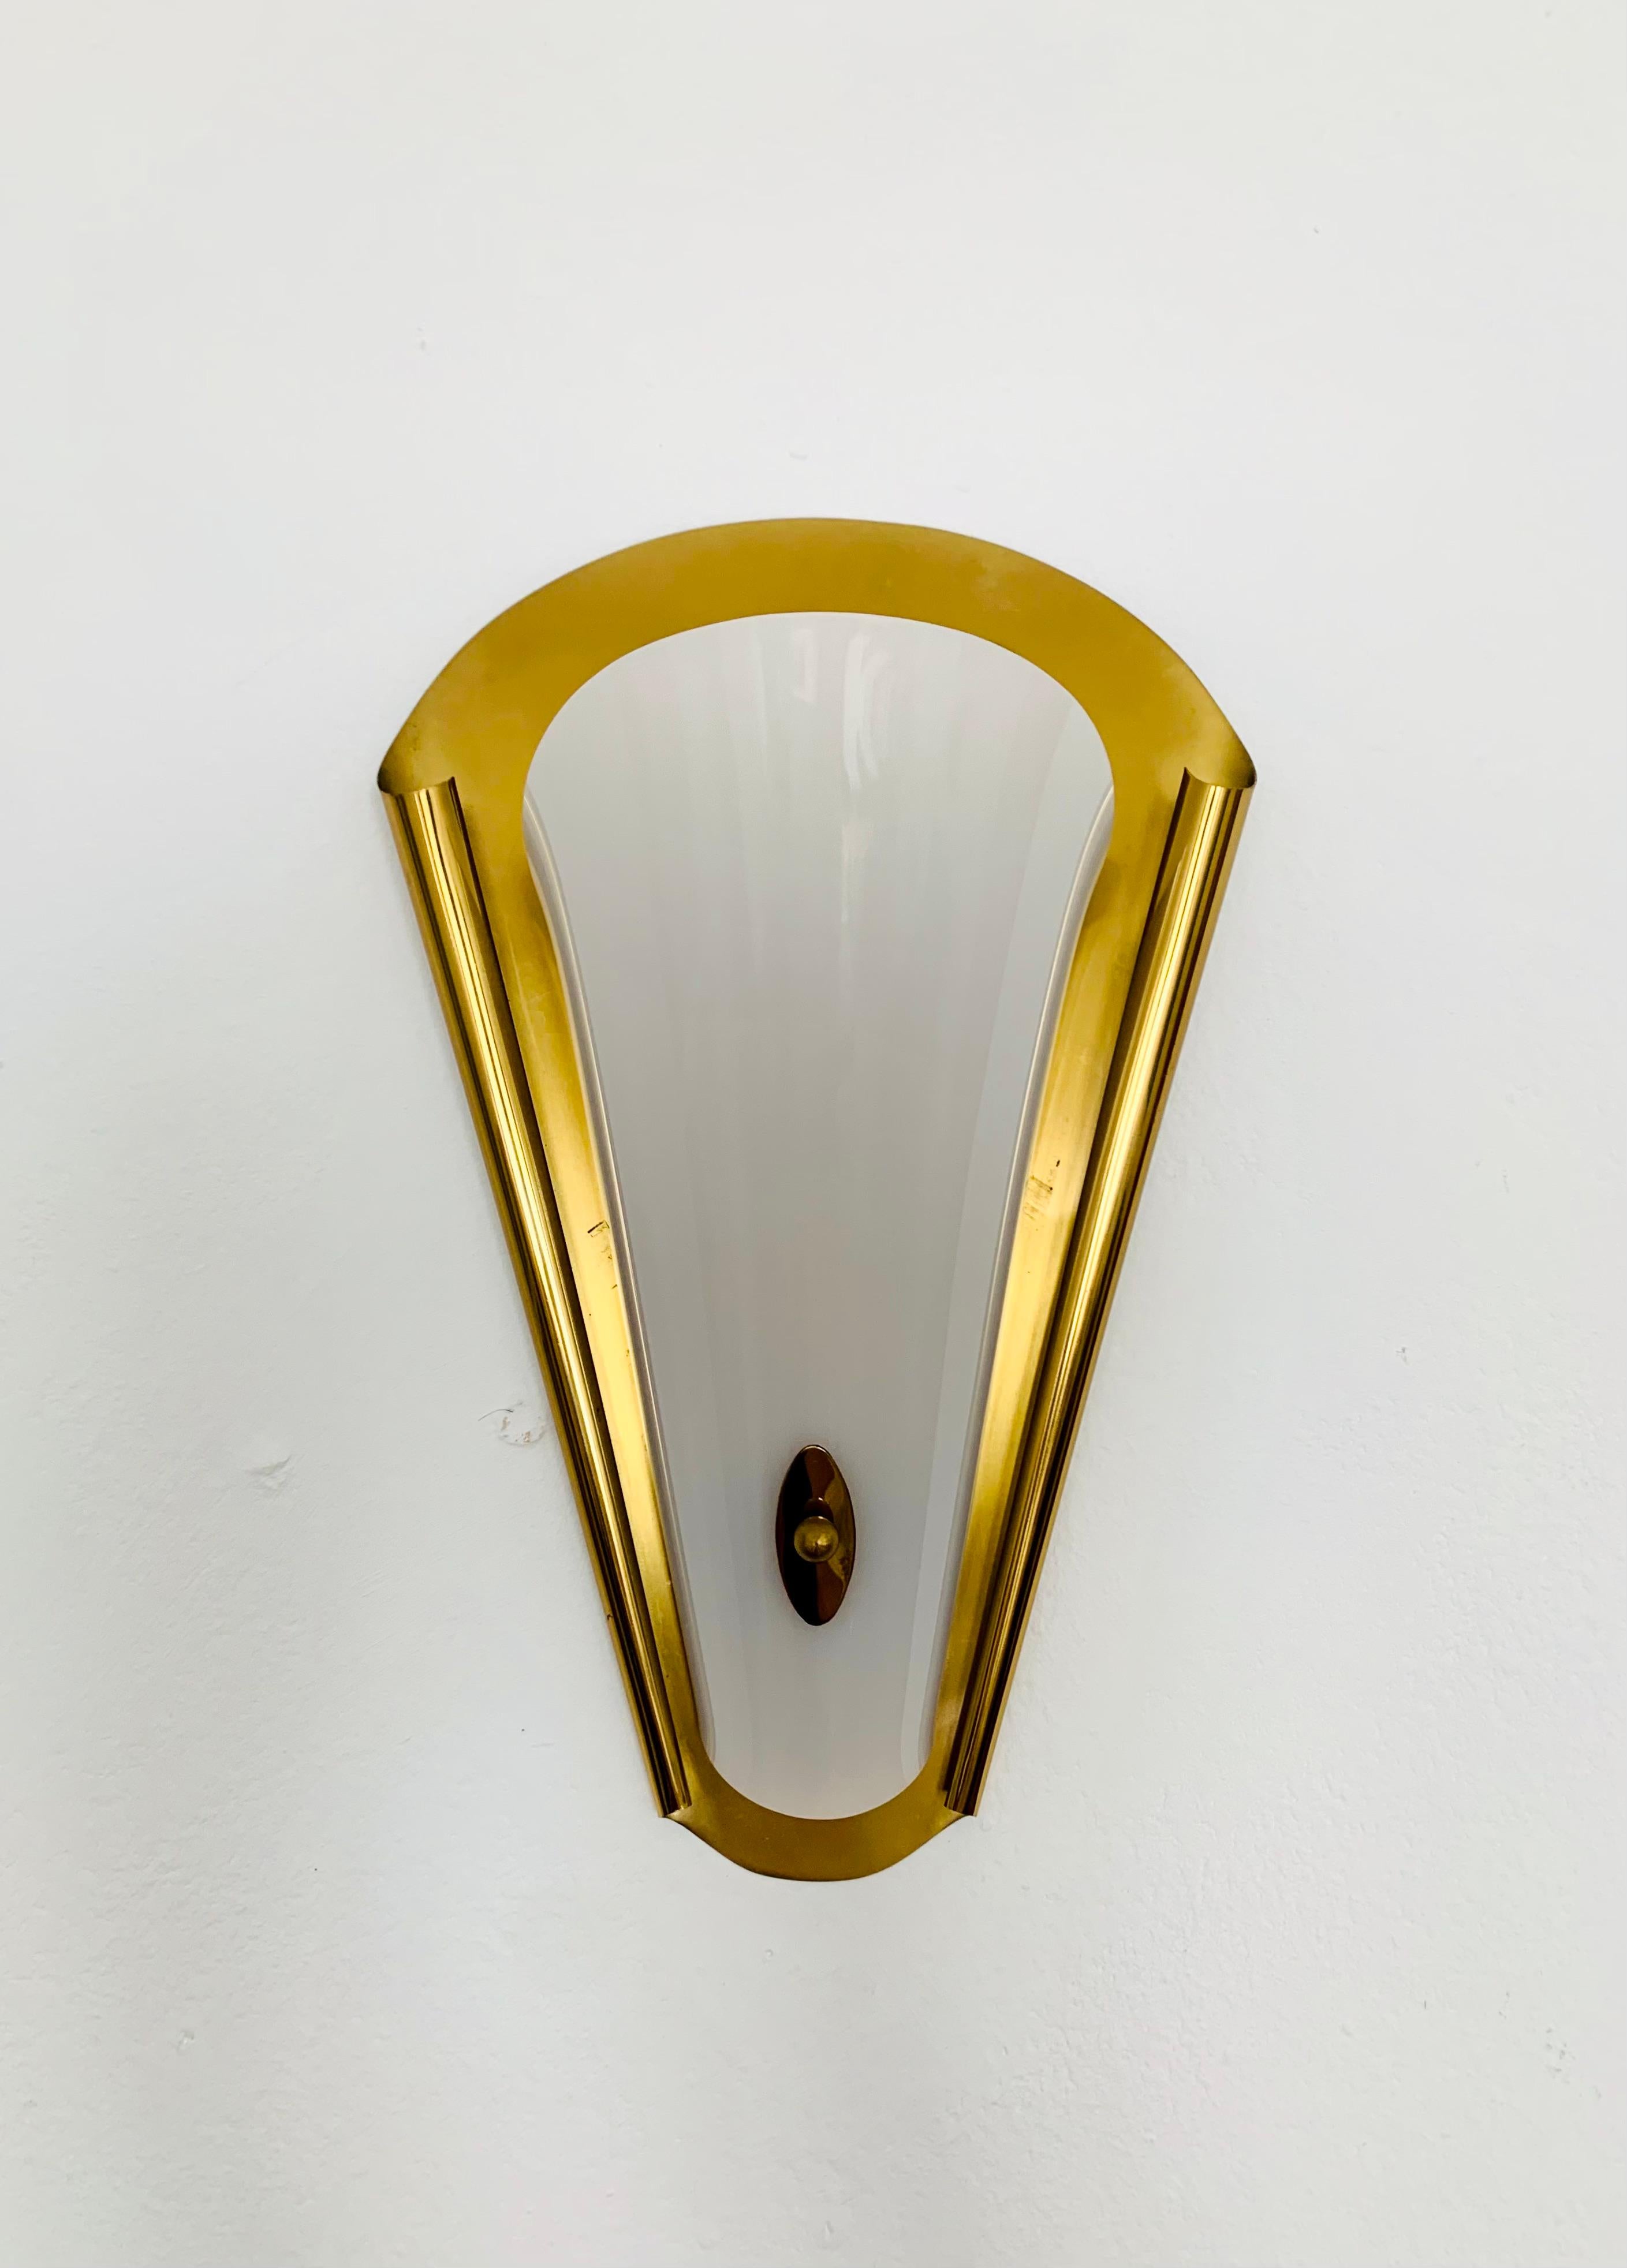 Very nice brass wall lamp from the 1950s.
Charming design with loving details.
It creates a breathtaking lighting effect and is a real eye-catcher in every home.

Condition:

Very good vintage condition with slight signs of age-related wear.
The